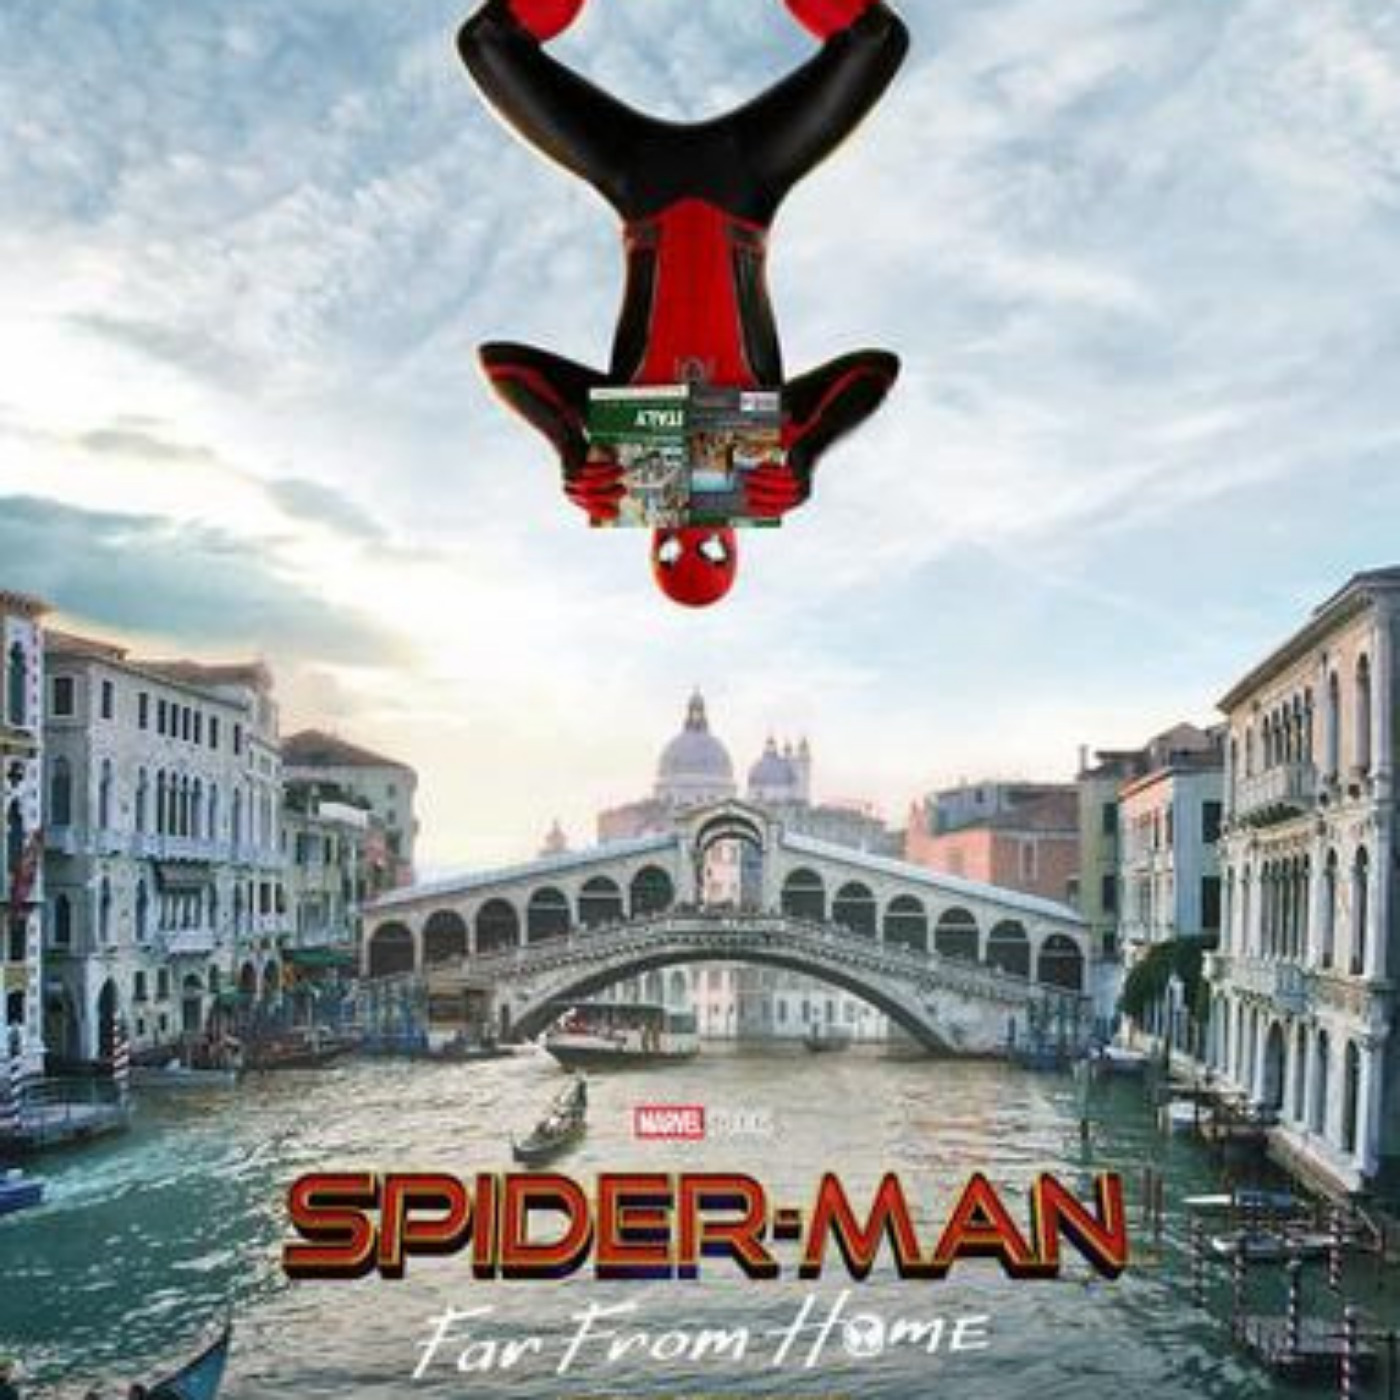 Spider-Man: Far From Home (Spoiler heavy review!)